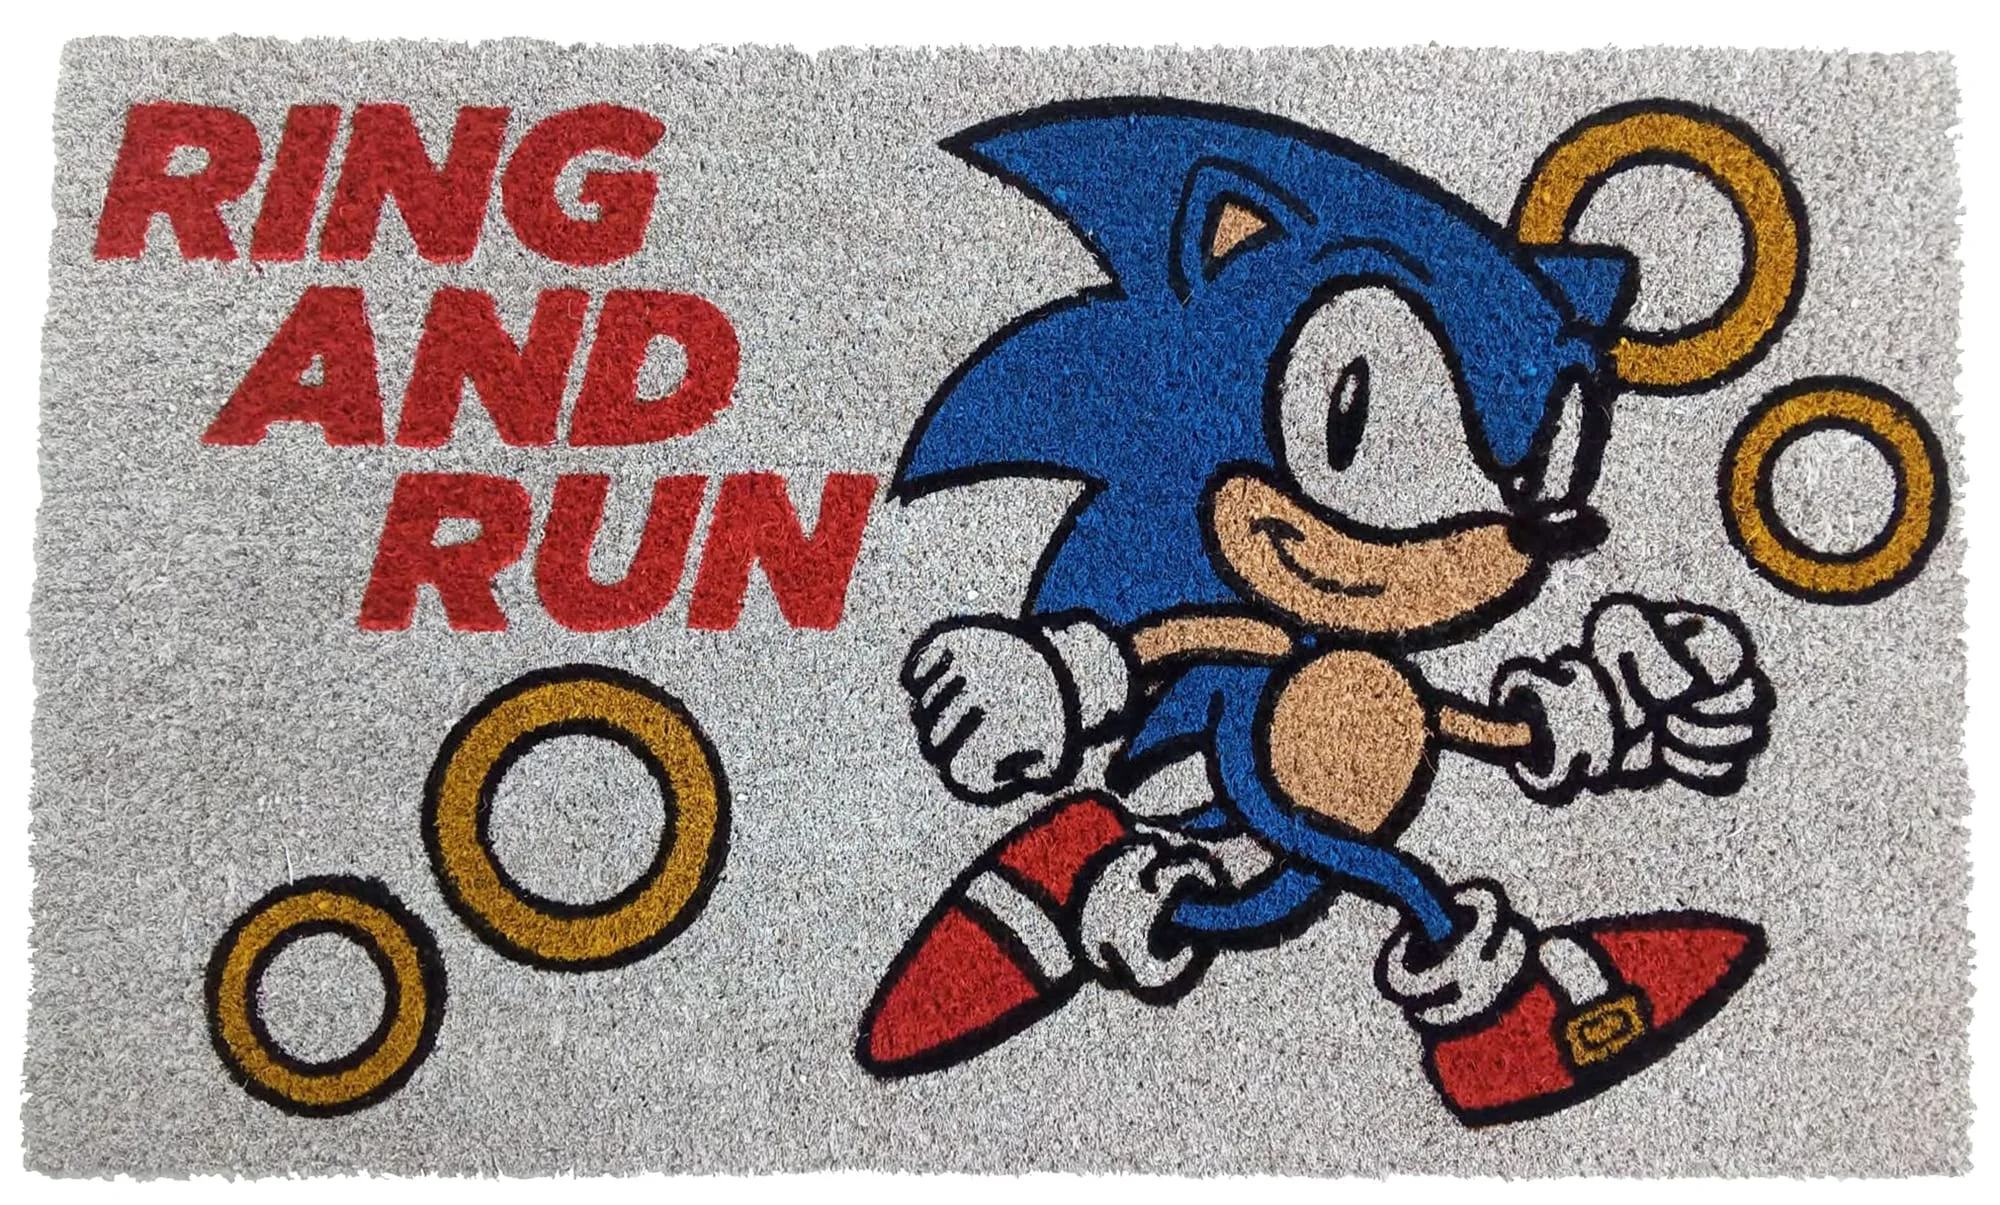 Sonic the Hedgehog - Ring and Run (17"x29" Doormat)